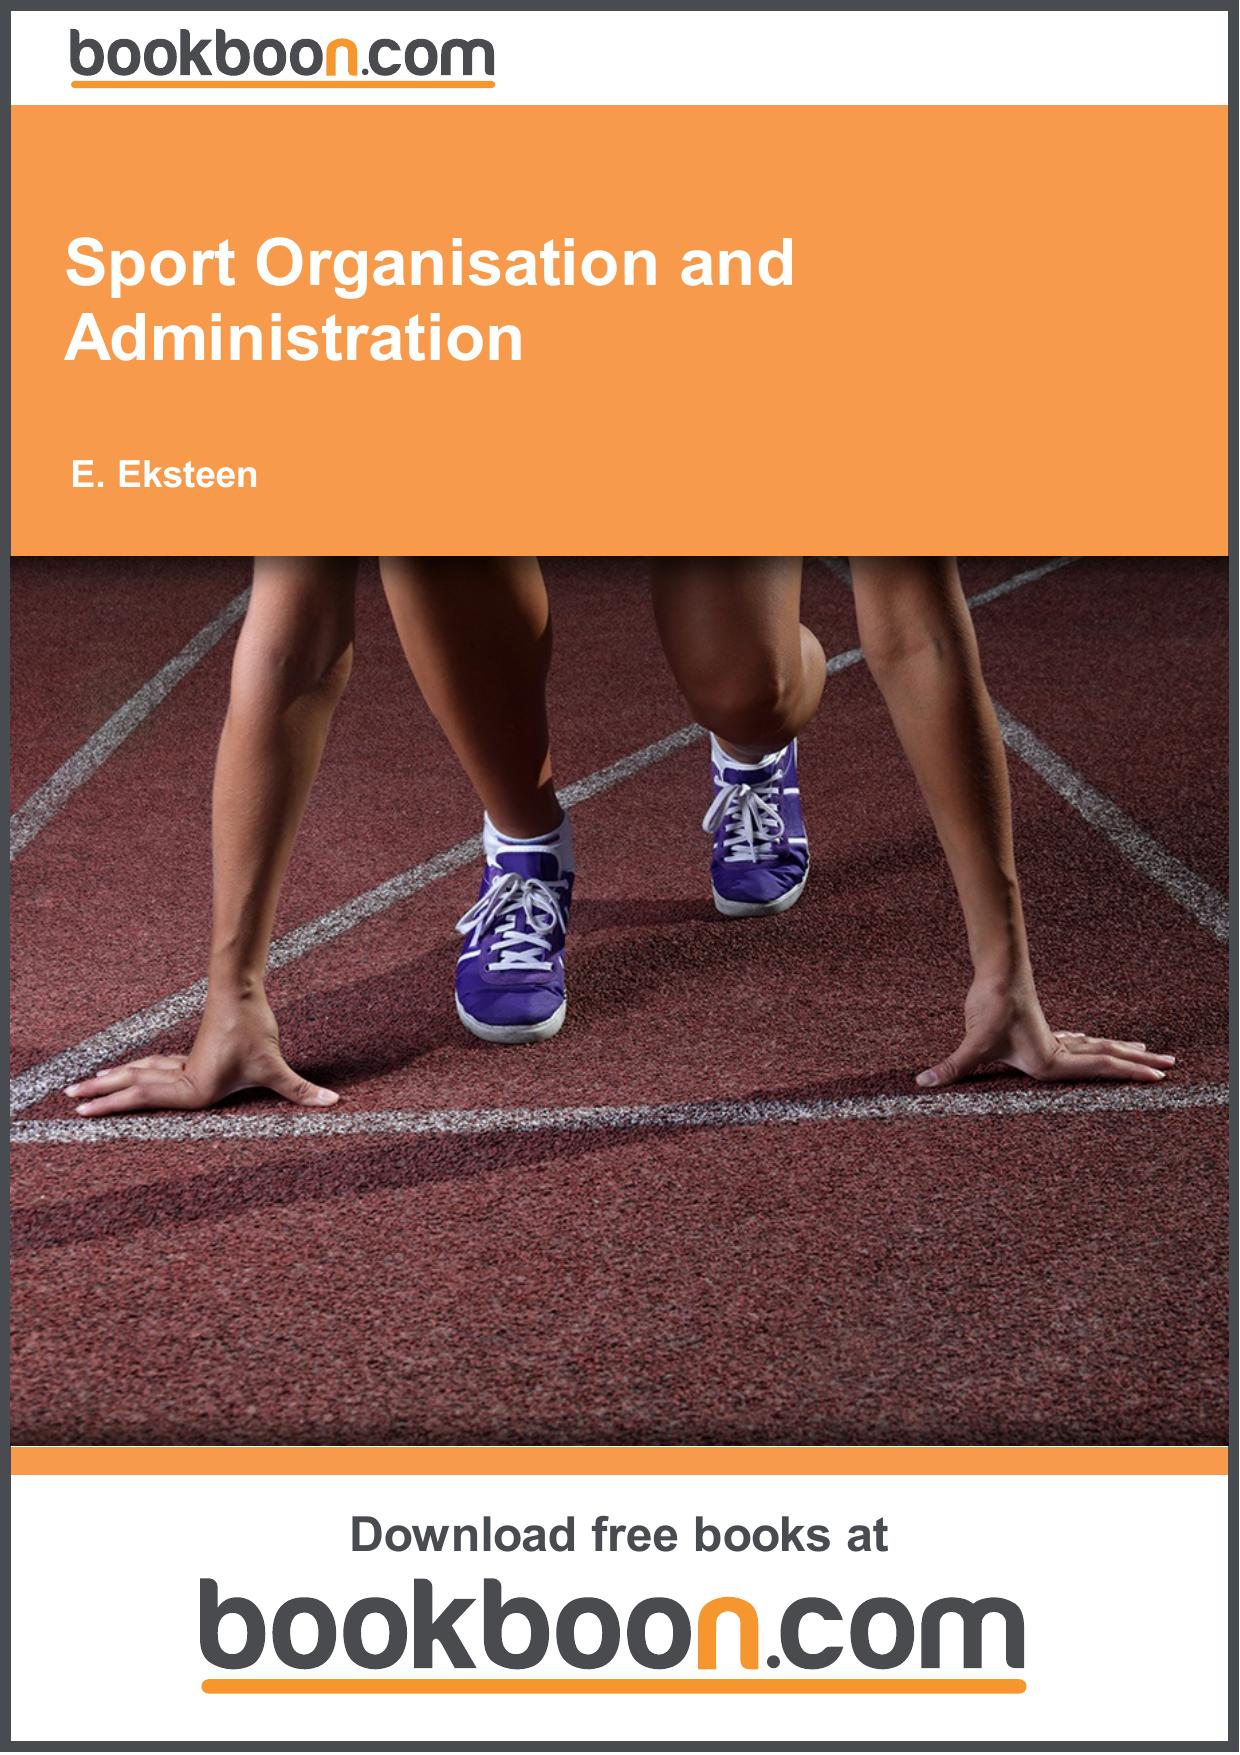 Sport-Organisation-and-Administration 2014